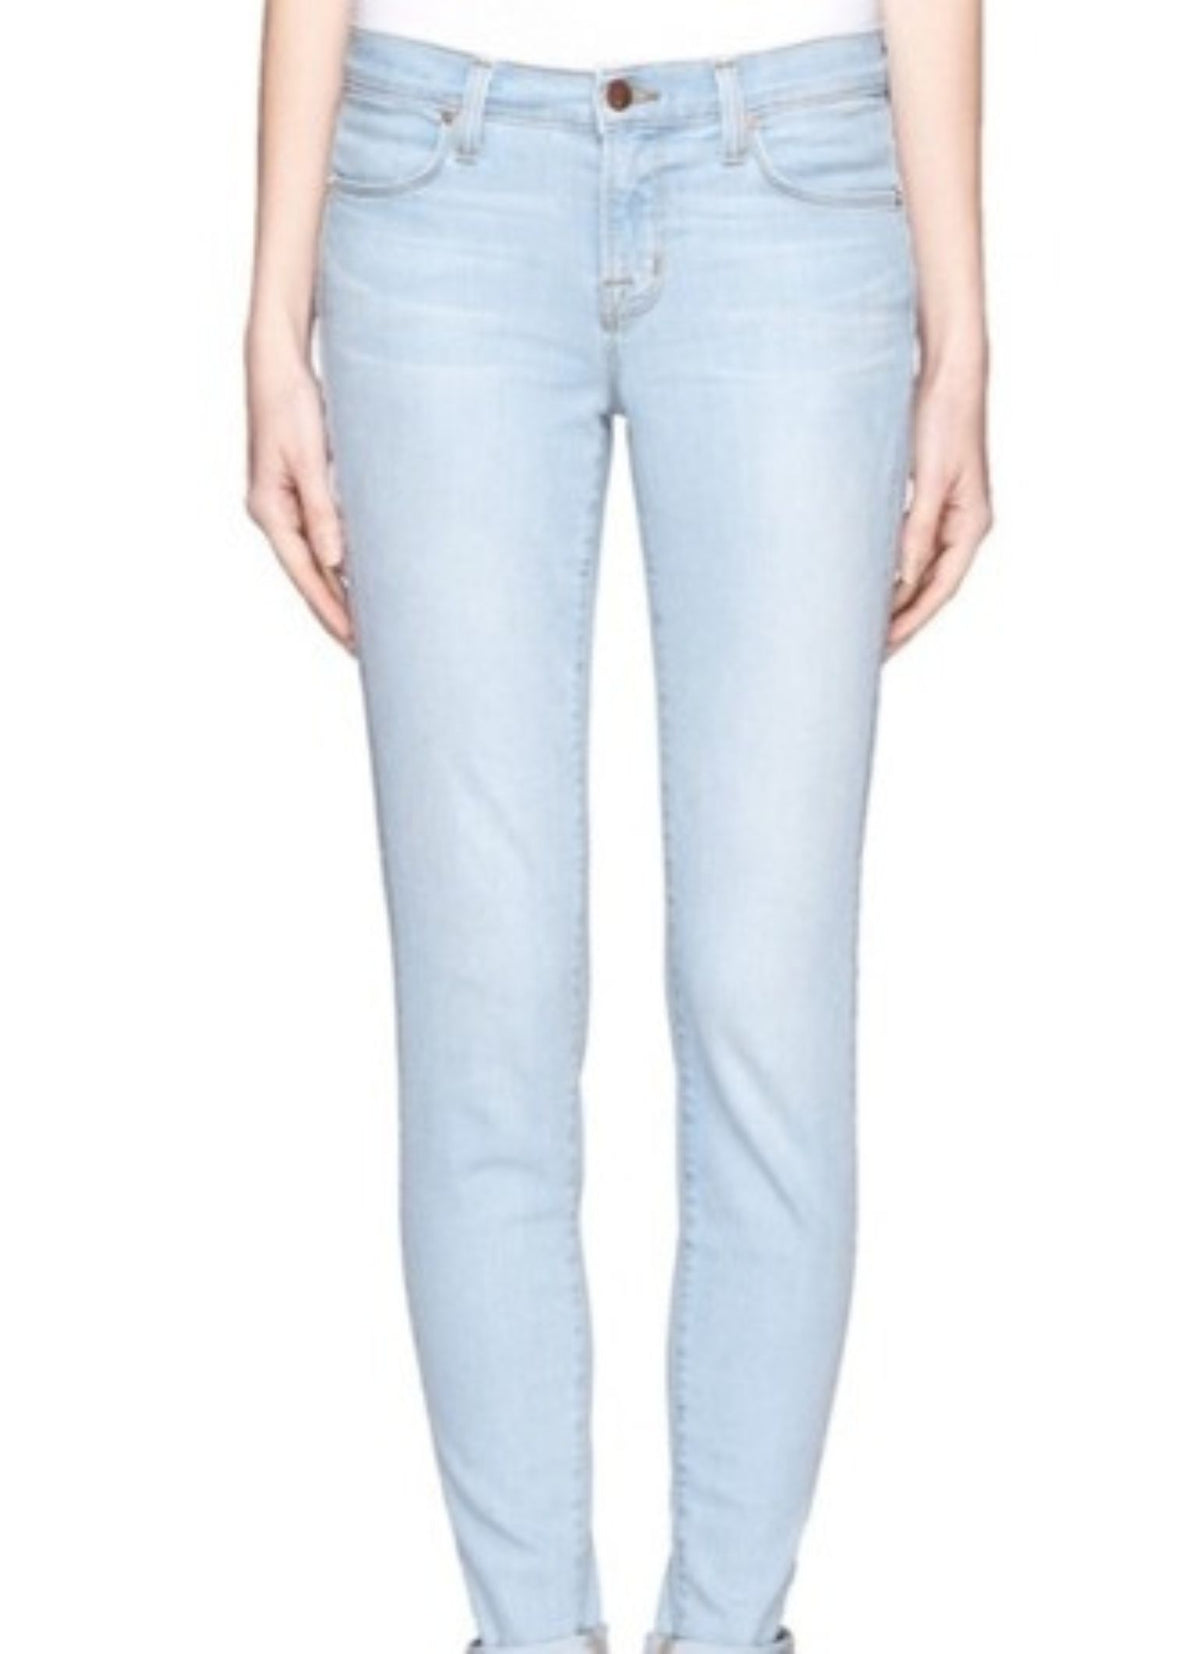 J Brand Even Tide Jeans - Second Chance